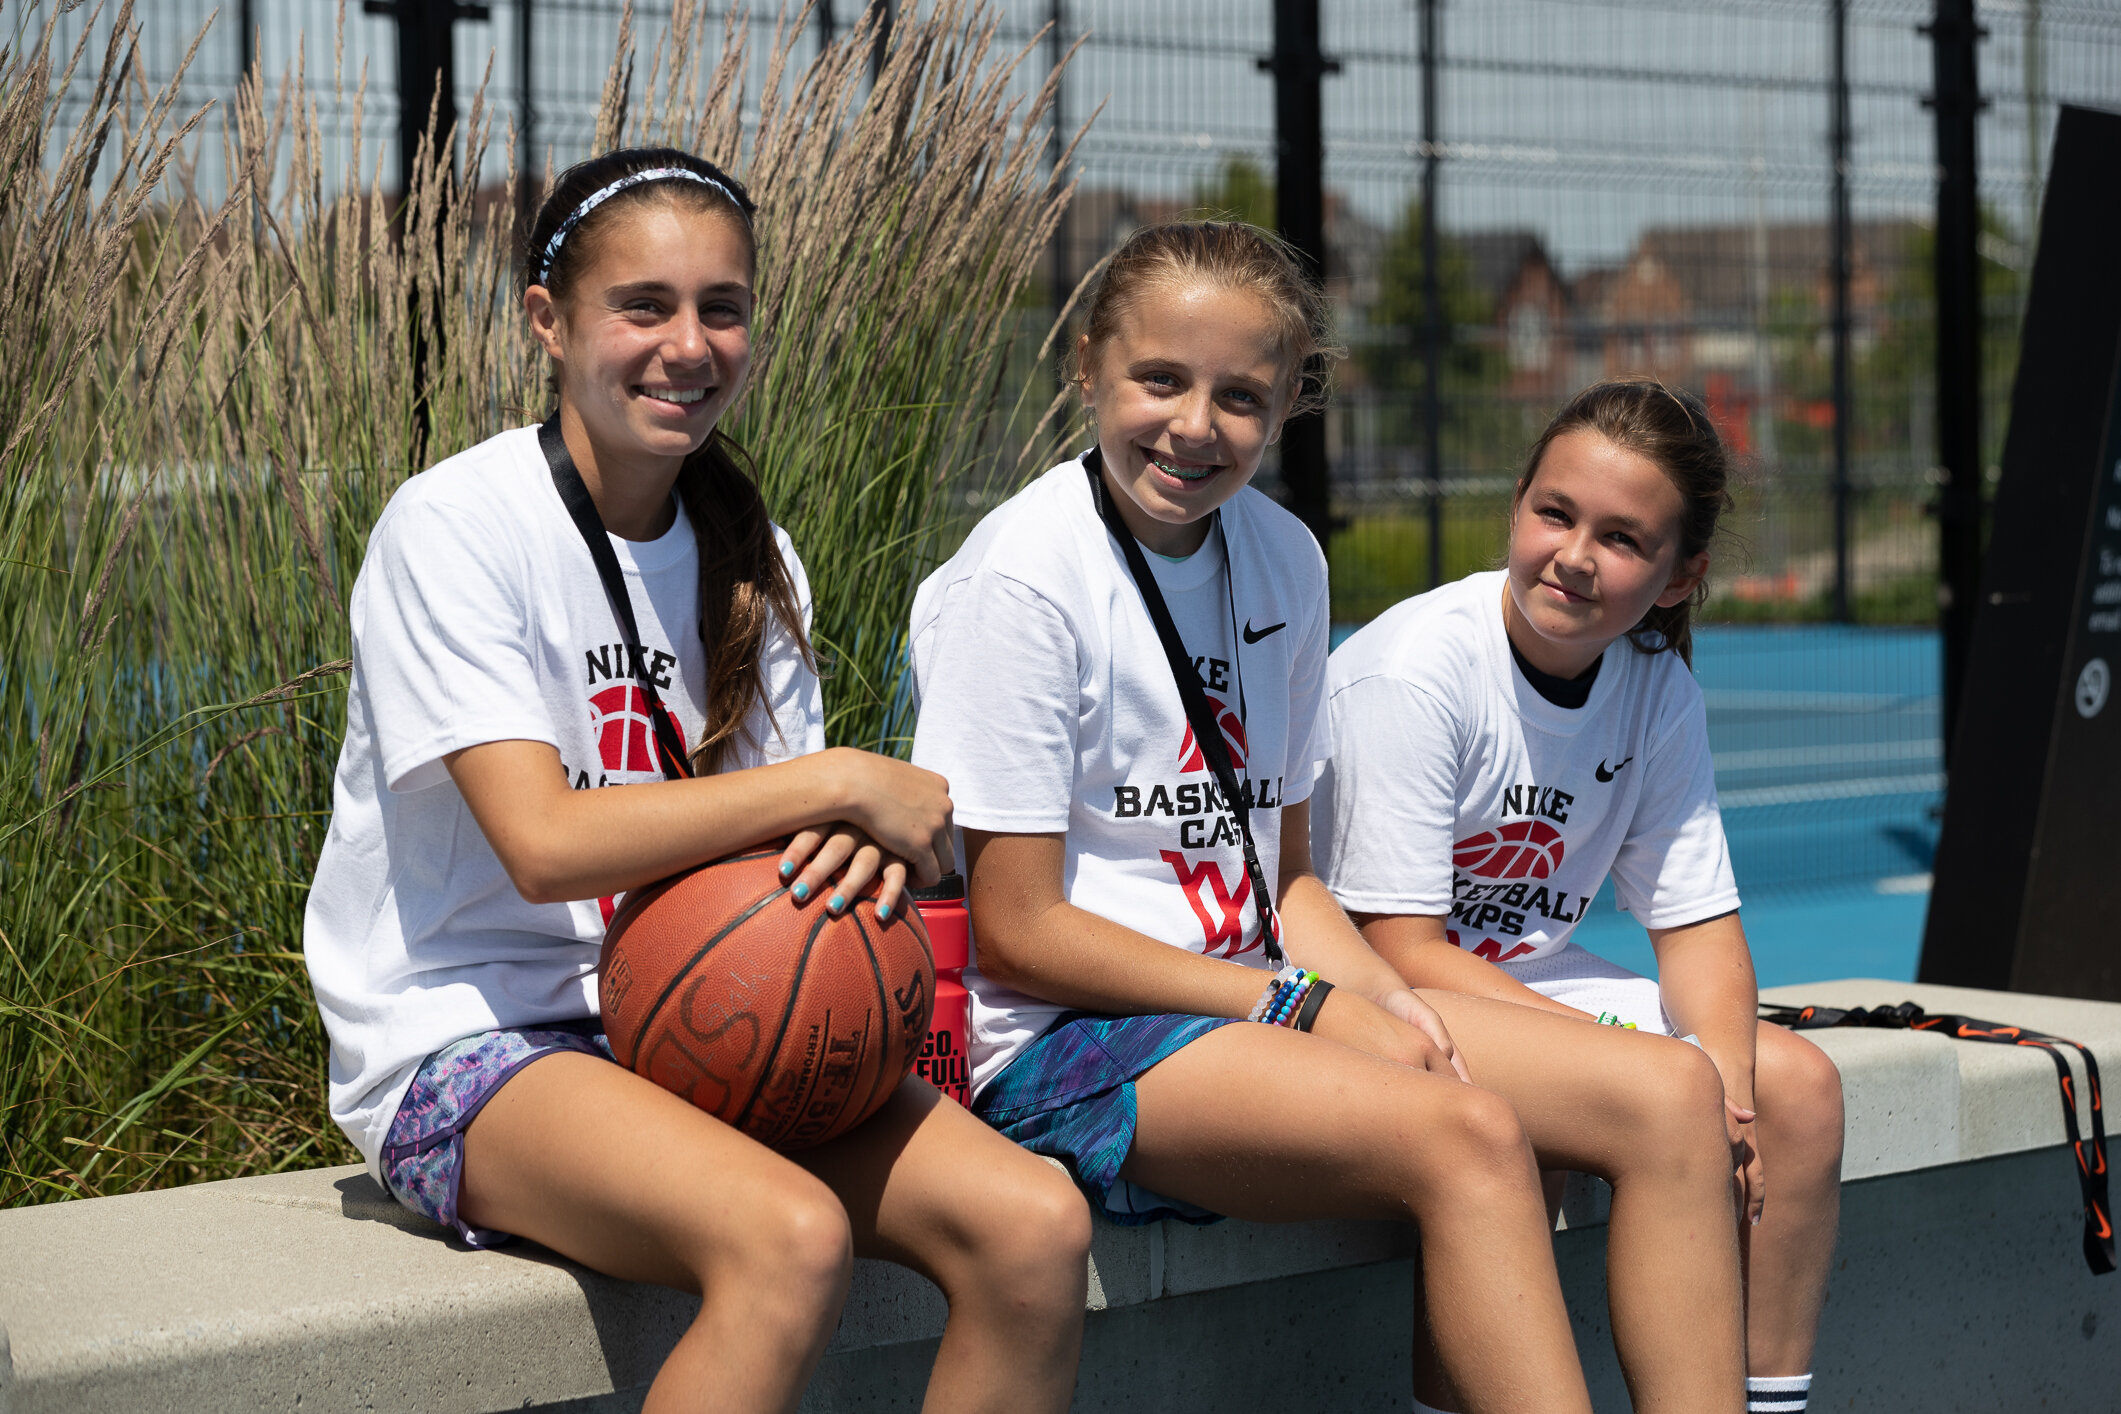 Unirse Autonomía jefe PTBOCanada Featured Post: What Time 2 Hoop and Nike Basketball Camps Have  to Offer at The Playground East Peterborough This Summer — PtboCanada